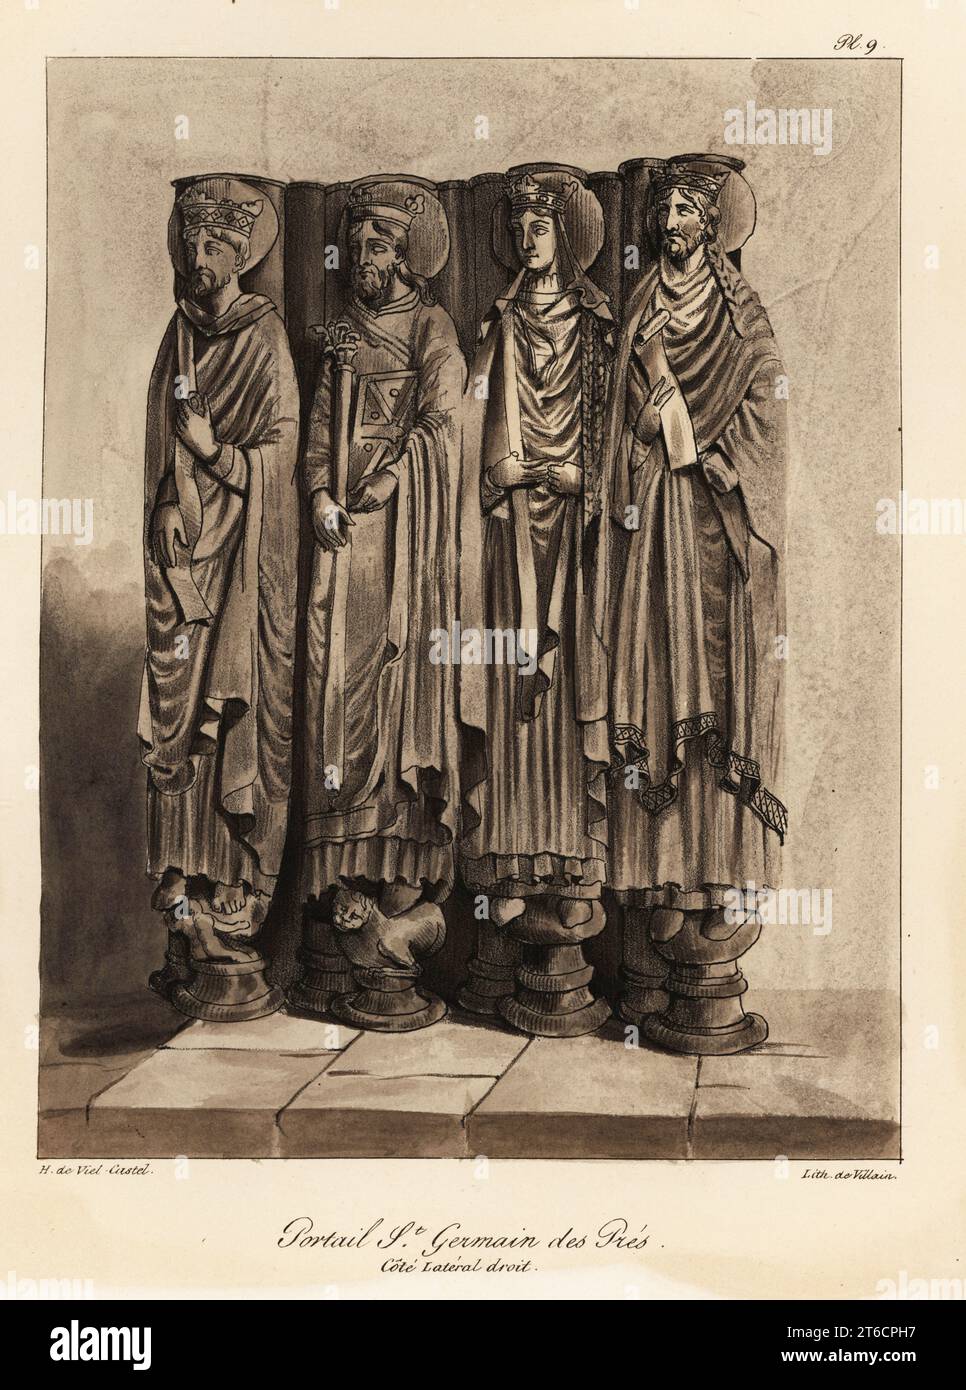 Portal of the Abbey of St. Germain de Pres, Paris, with statues of the Merovingian princes, sons of the Frankish king Clovis I. Portail St. Germain des Pres, cote lateral gauche. Tinted lithograph by Villain after an illustration by Horace de Viel-Castel from his Collection des costumes, armes et meubles pour servir à l'histoire de la France (Collection of costumes, weapons and furniture to be used in the history of France), Treuttel & Wurtz, Bossange, 1827. Stock Photo